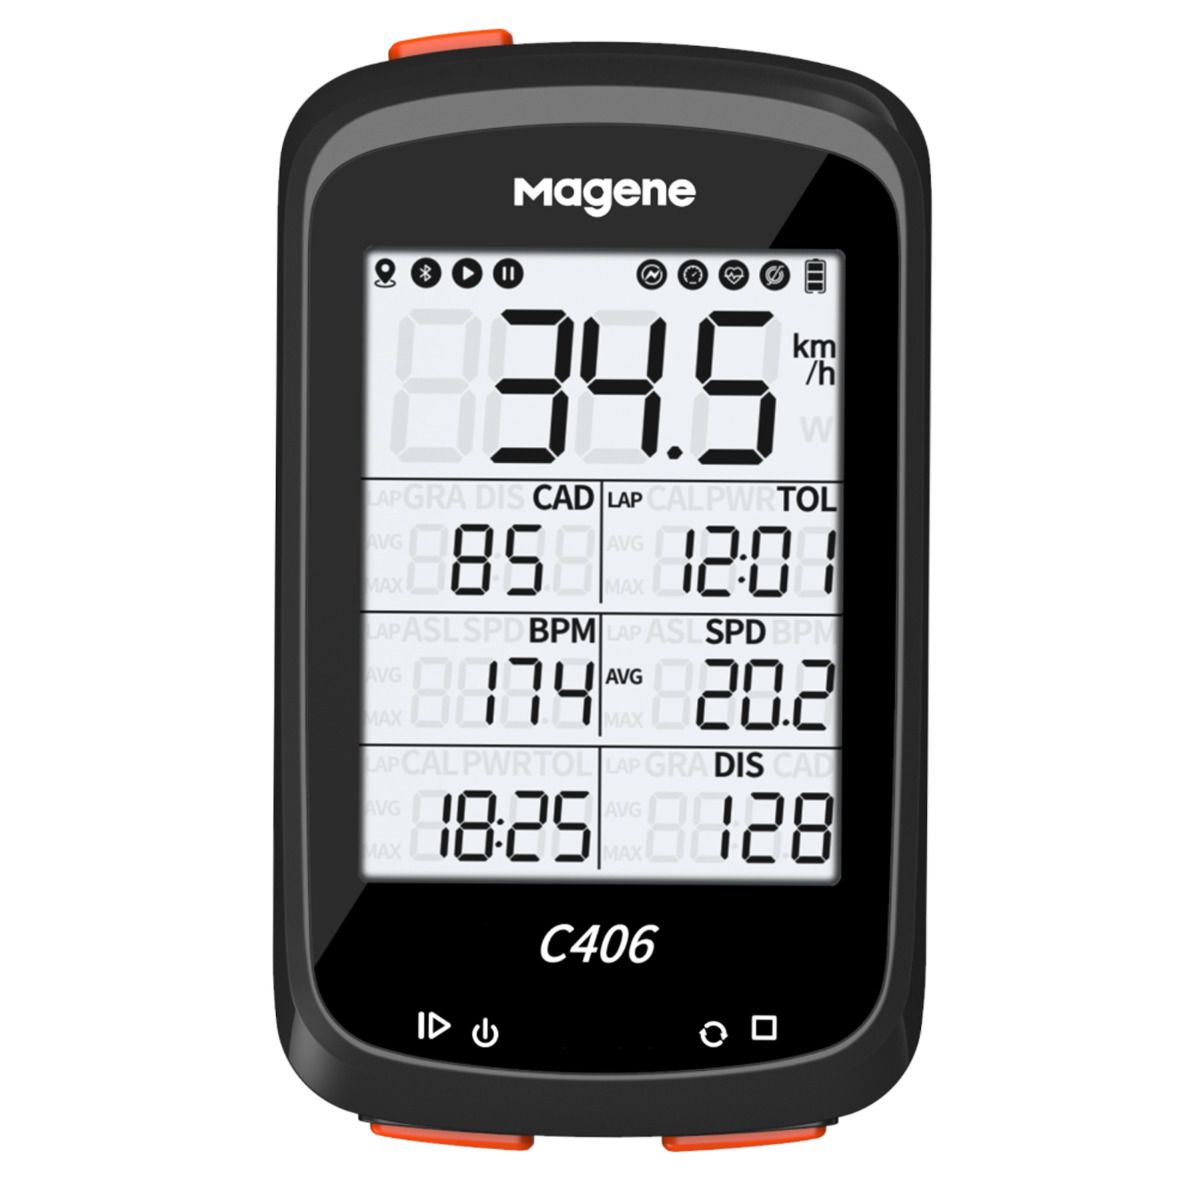 Magene C406 GPS Device - Cyclop.in